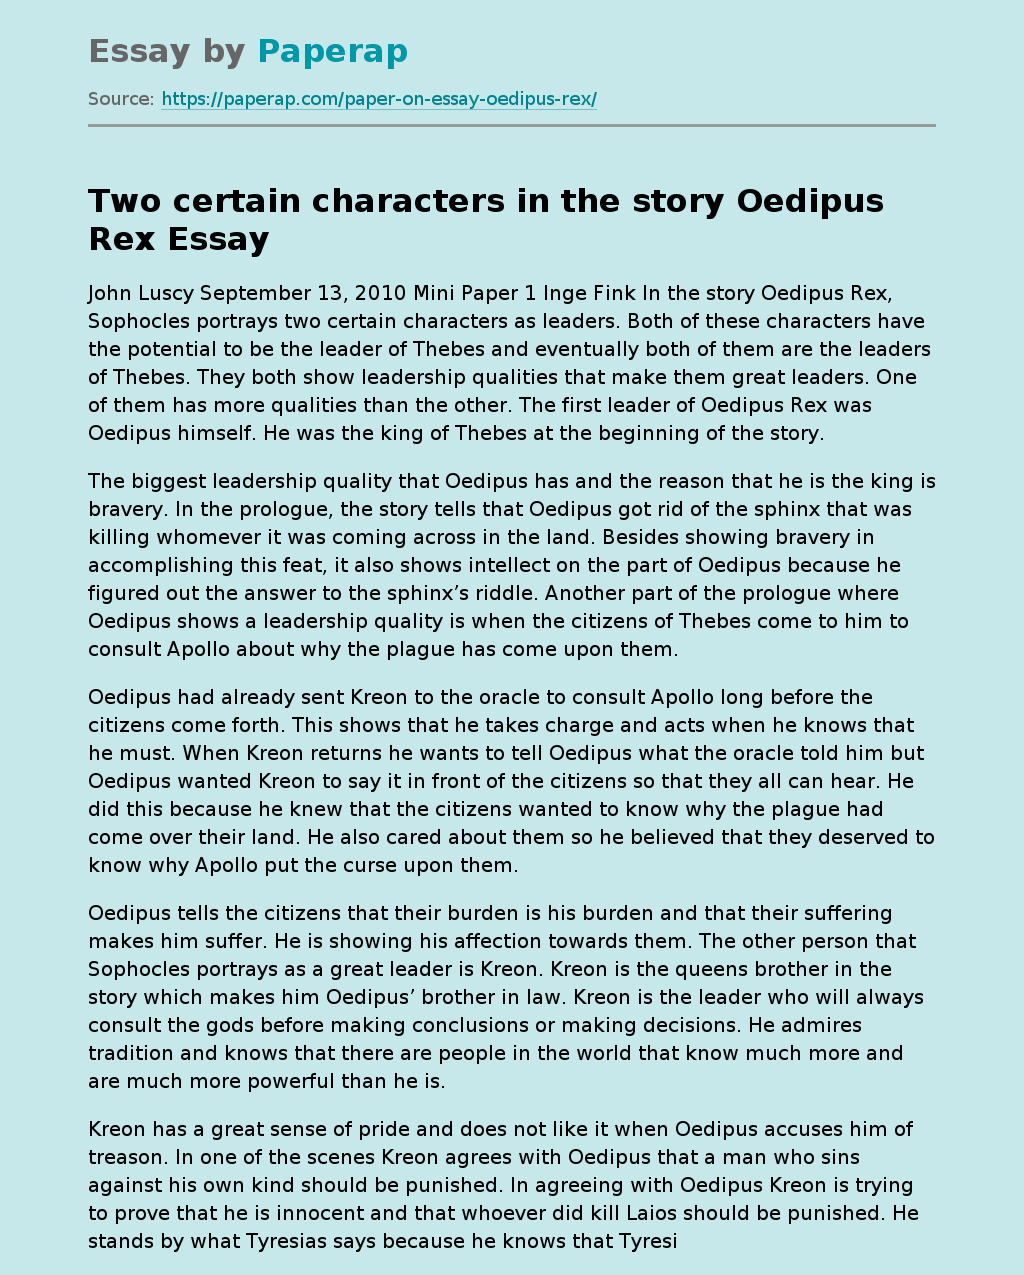 Two Certain Characters In The Story Oedipus Rex